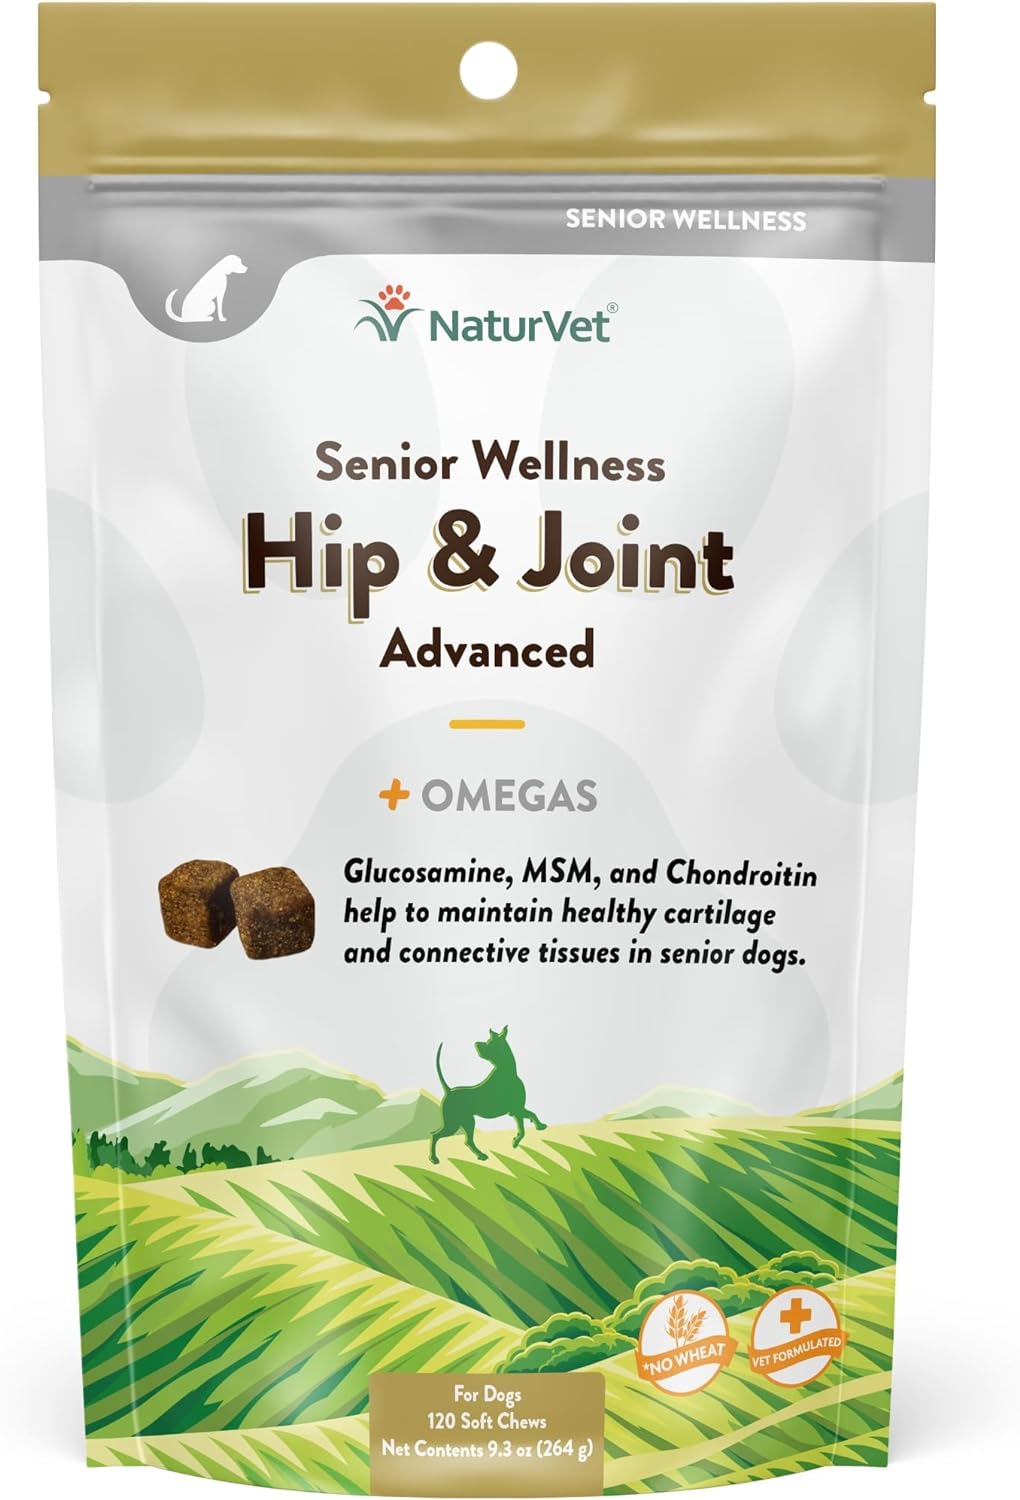 NaturVet – Senior Wellness Hip & Joint Advanced Plus Omegas | Help Support Your Pet’s Healthy Hip & Joint Function | Supports Joints, Cartilage & Connective Tissues | 120 Soft Chews